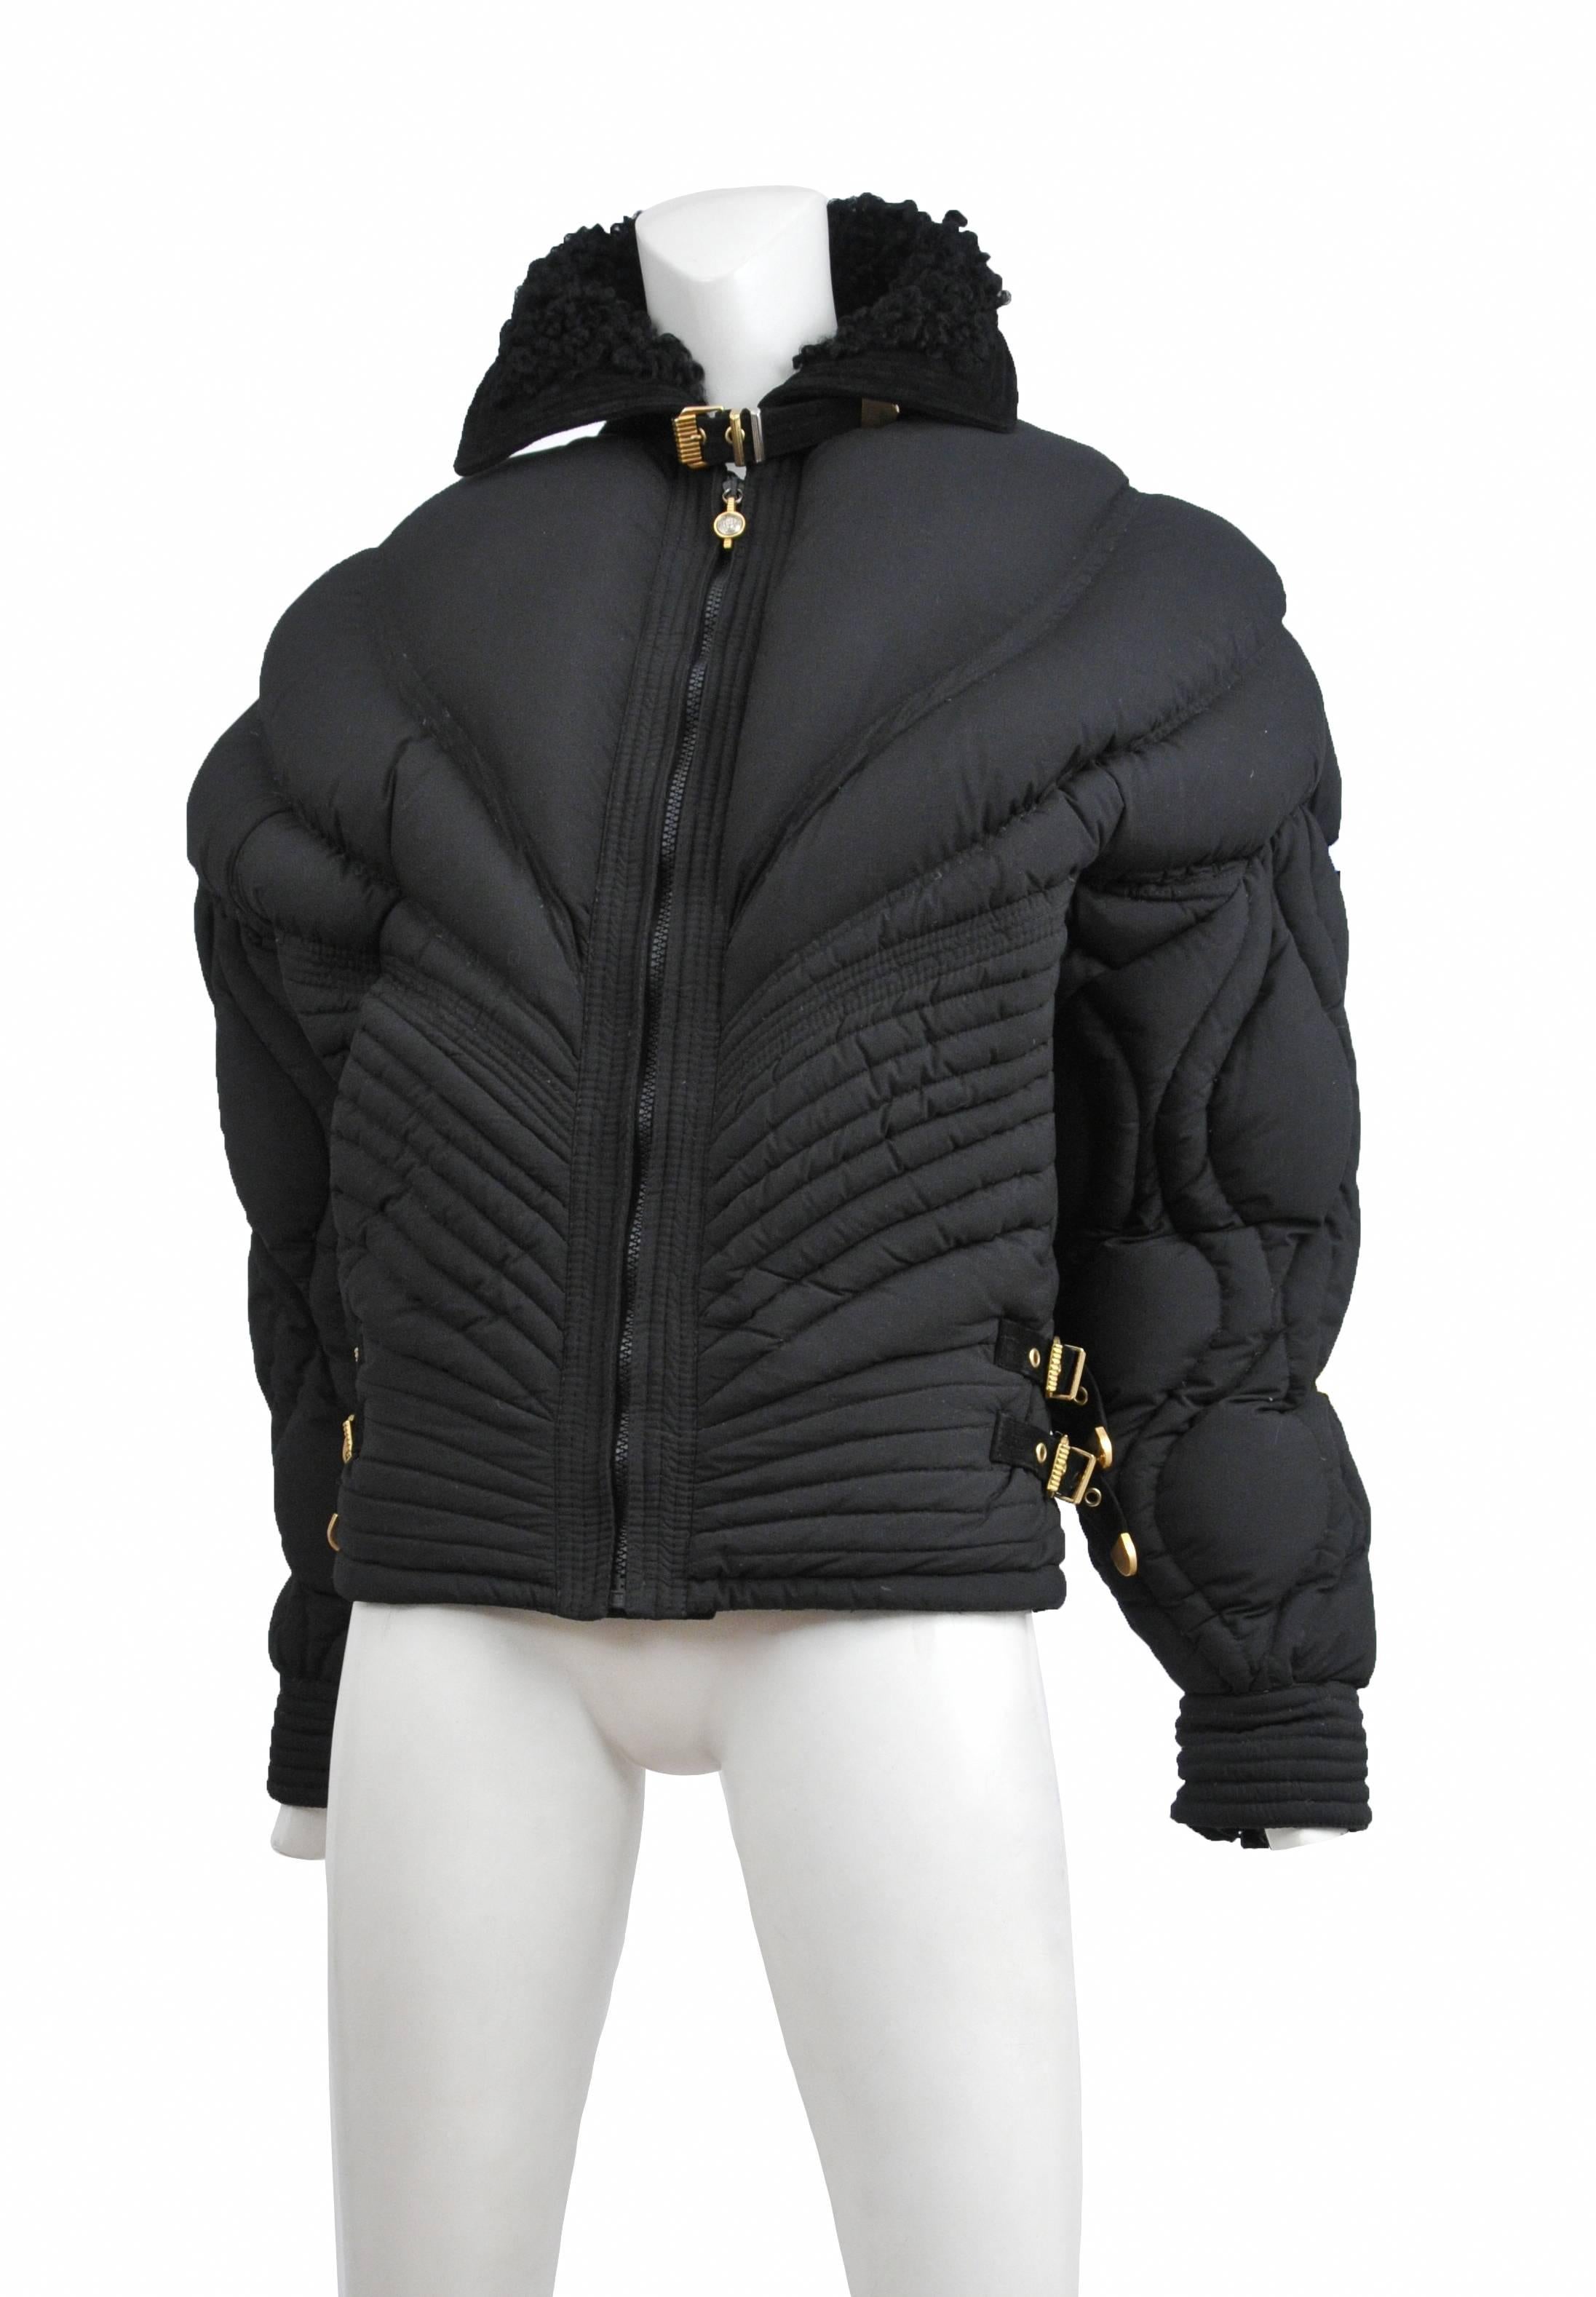 Vintage Gianni Versace rare apres quilted ski jacket in black brushed rayon. Corset style waist has leather and gold bondage buckles. The zipper pulls through out are adorned with the medusa icon. Jacket is trimmed in black suede with mongolian fur